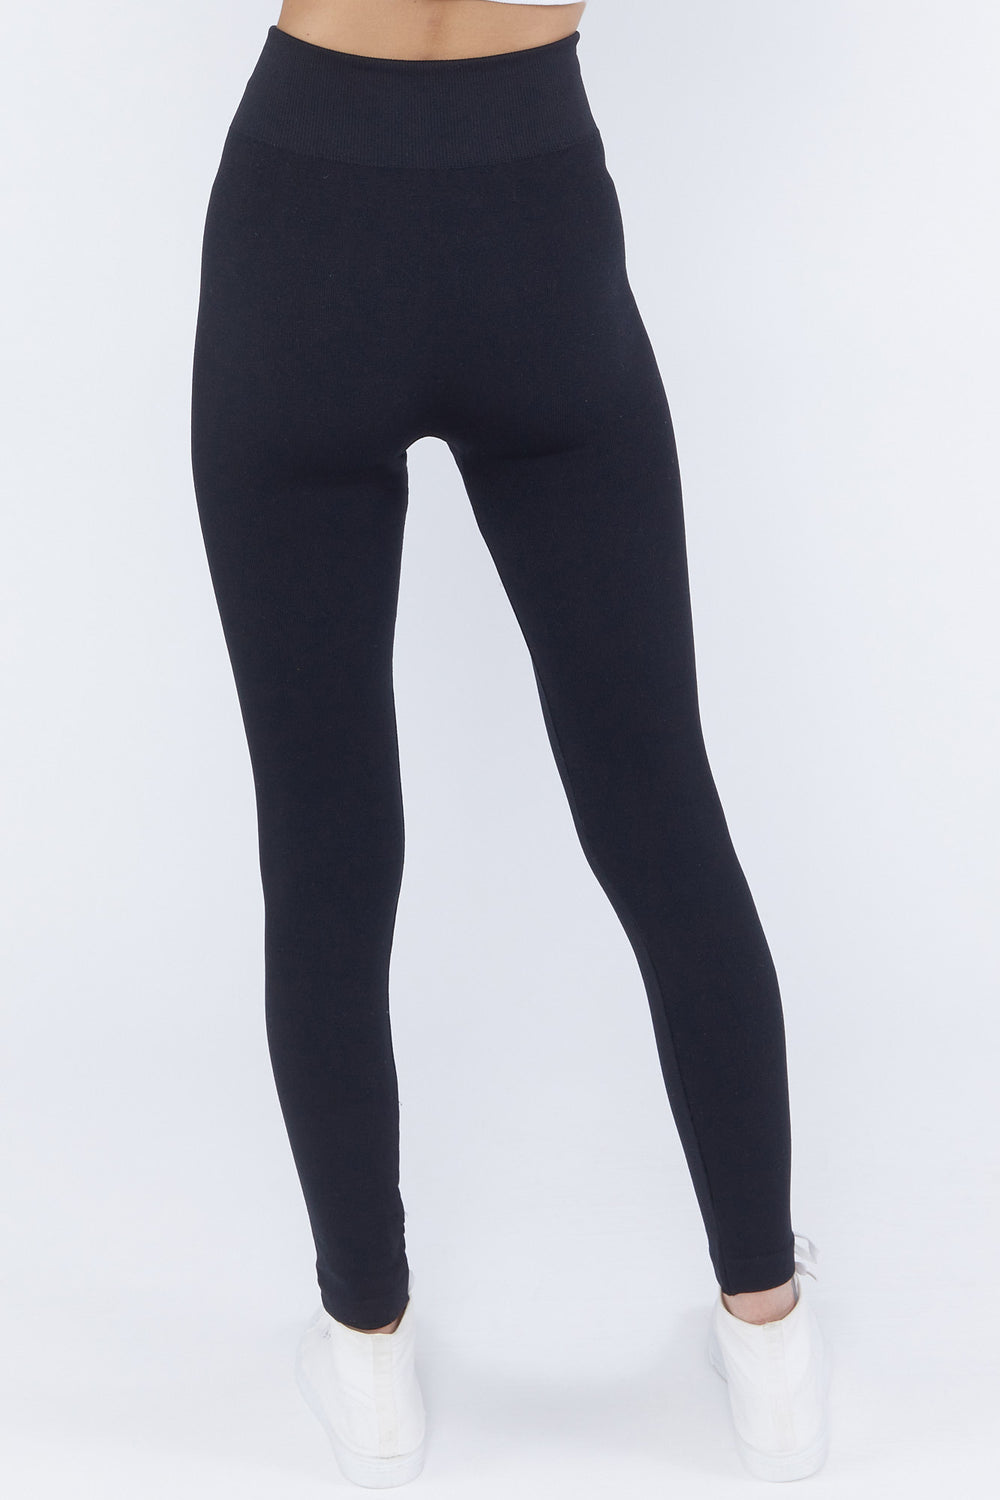 Cable-Knit Lined Seamless Leggings Black